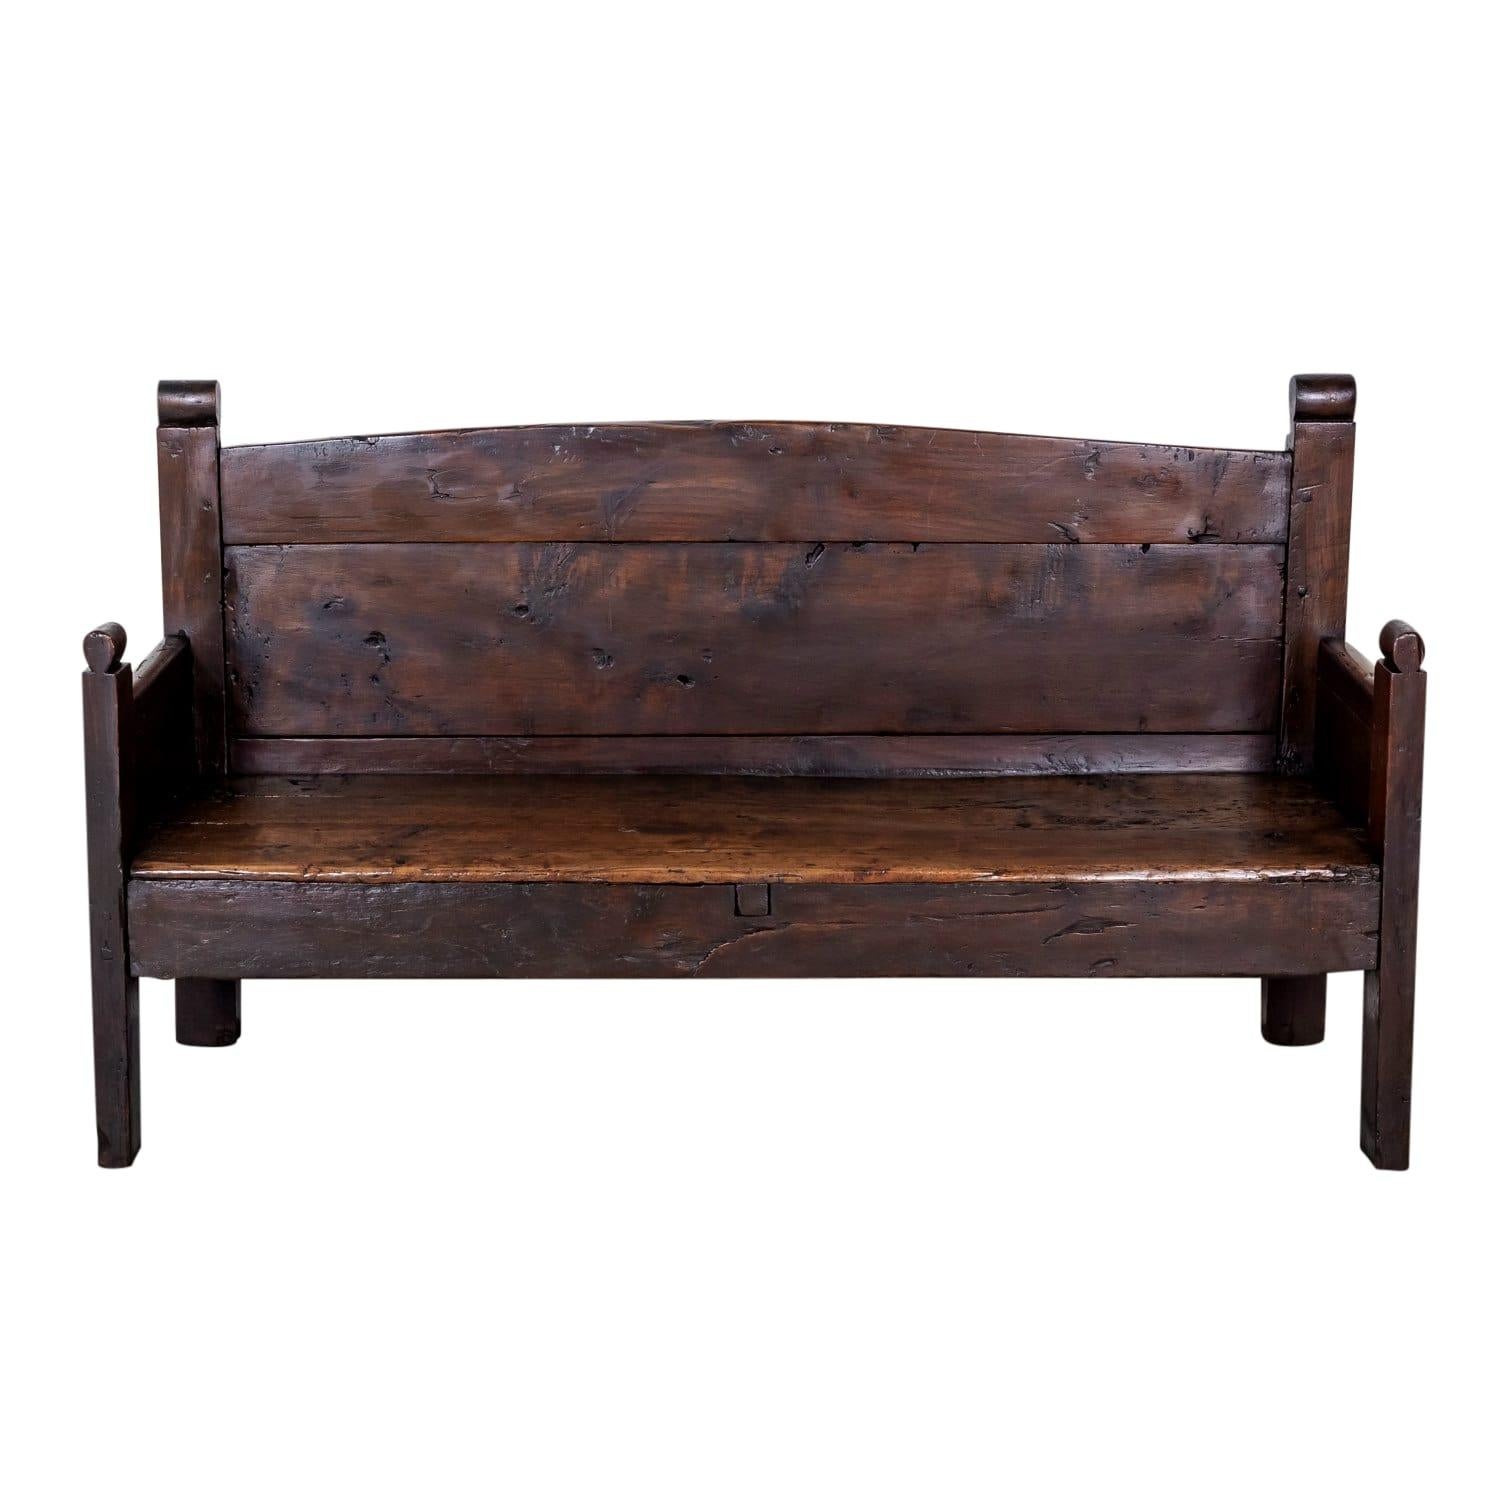 Mid-18th century rustic Spanish bench handcrafted near Valencia on Spain's southeastern coast of solid walnut, having four sculptural posts that rise up from each leg, circa 1750s. This handsome bench has aged and weathered to a beautiful patina